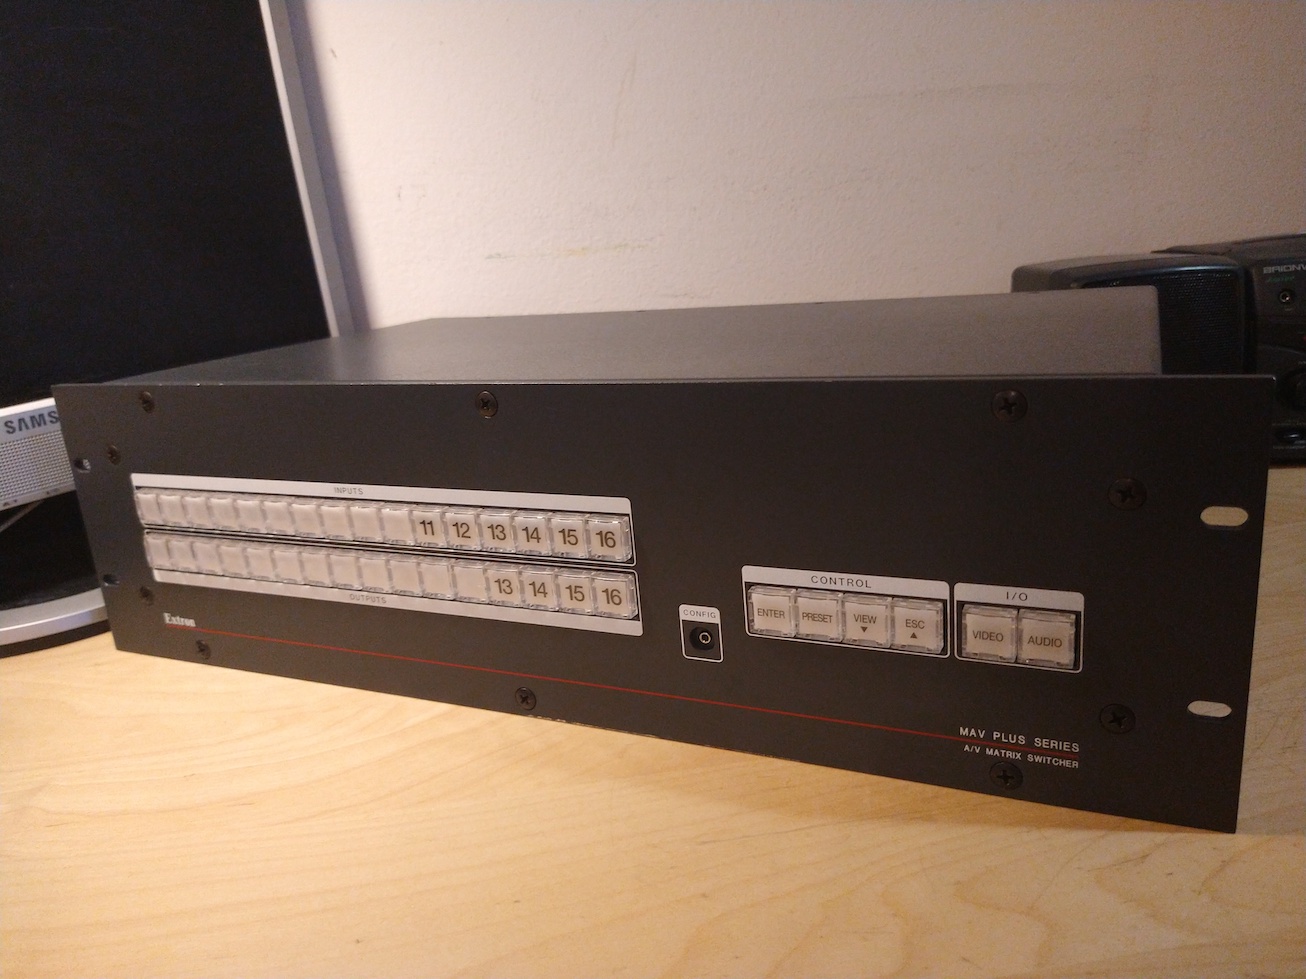 A front view of the Extron matrix switcher. There are 16 input and 16 output buttons, alongside 4 control buttons.